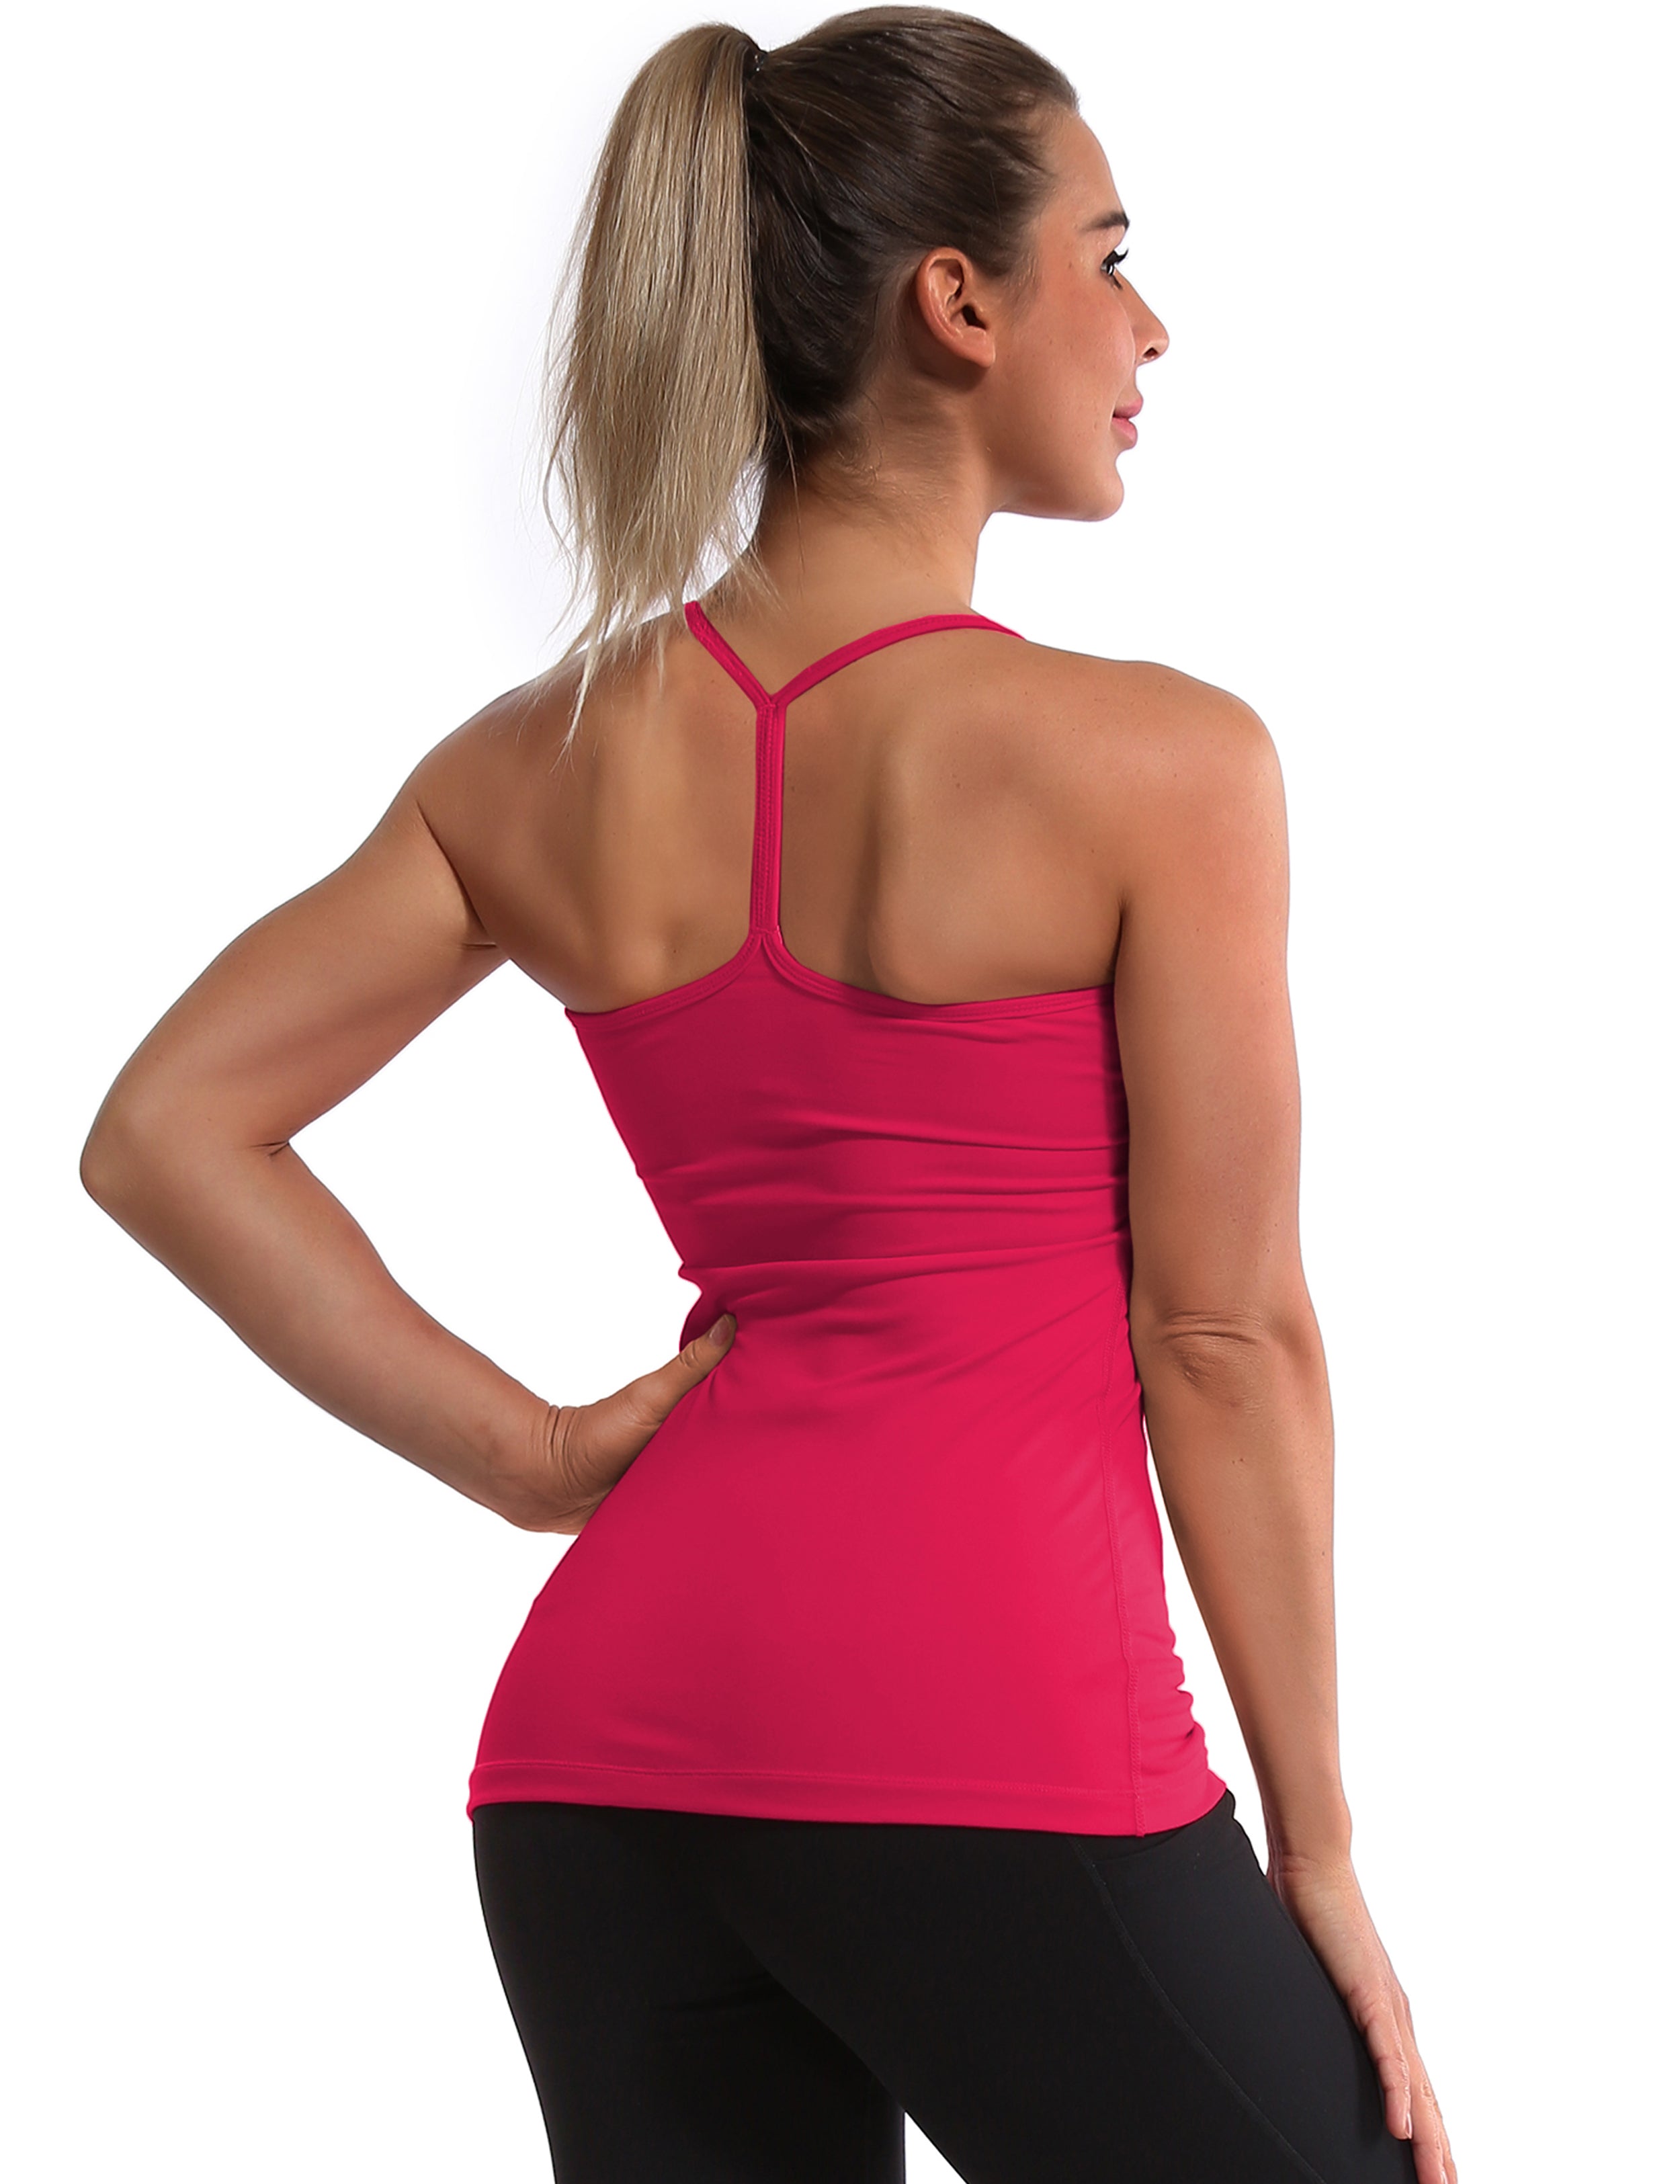 Y-back Spaghetti Strap Tank Tops red_Pilates